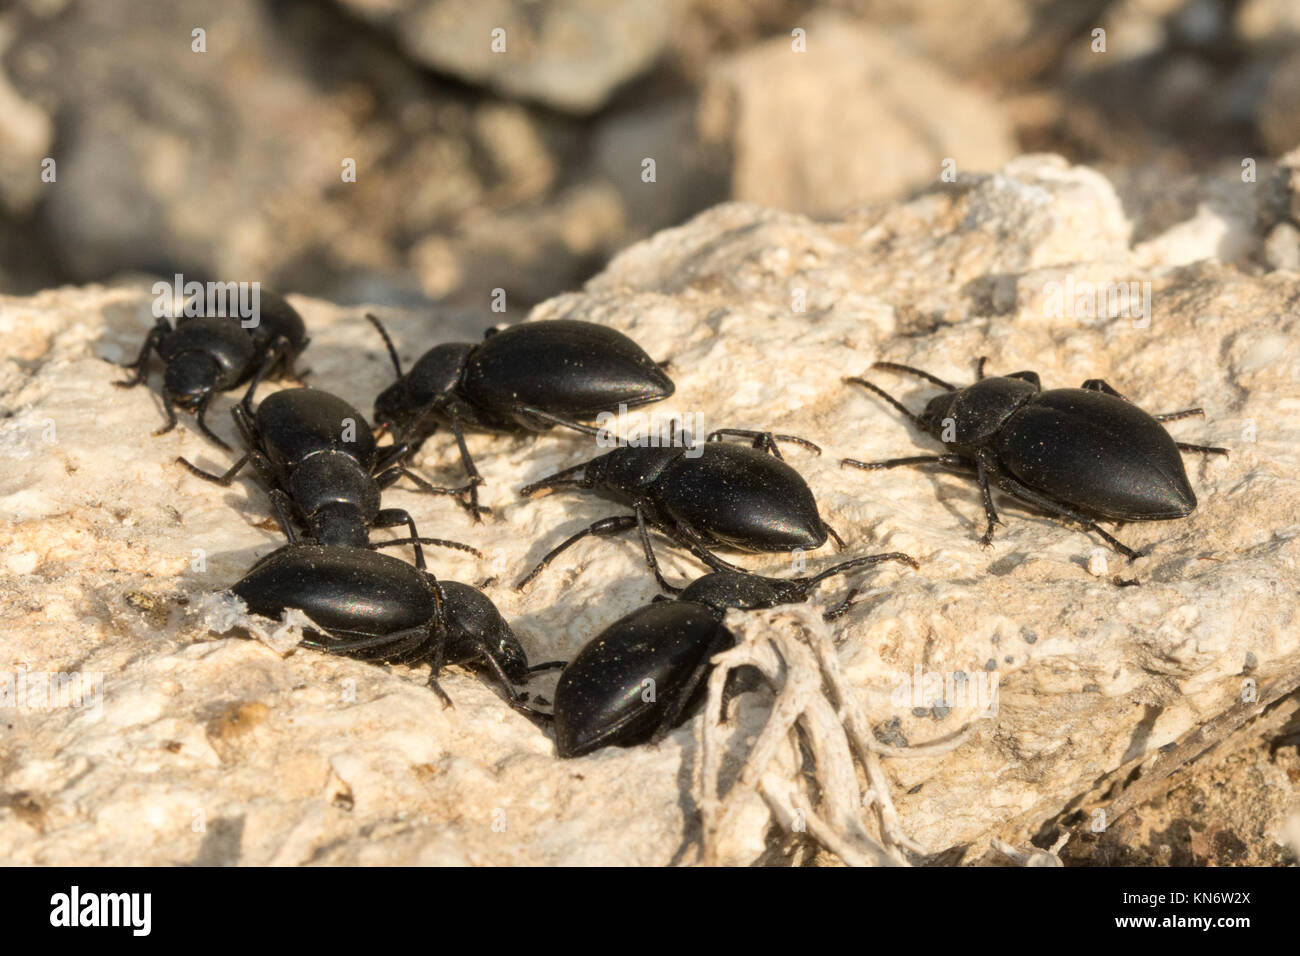 Several black beetles (Tentyria sp.) in a close group in Cyprus Stock Photo